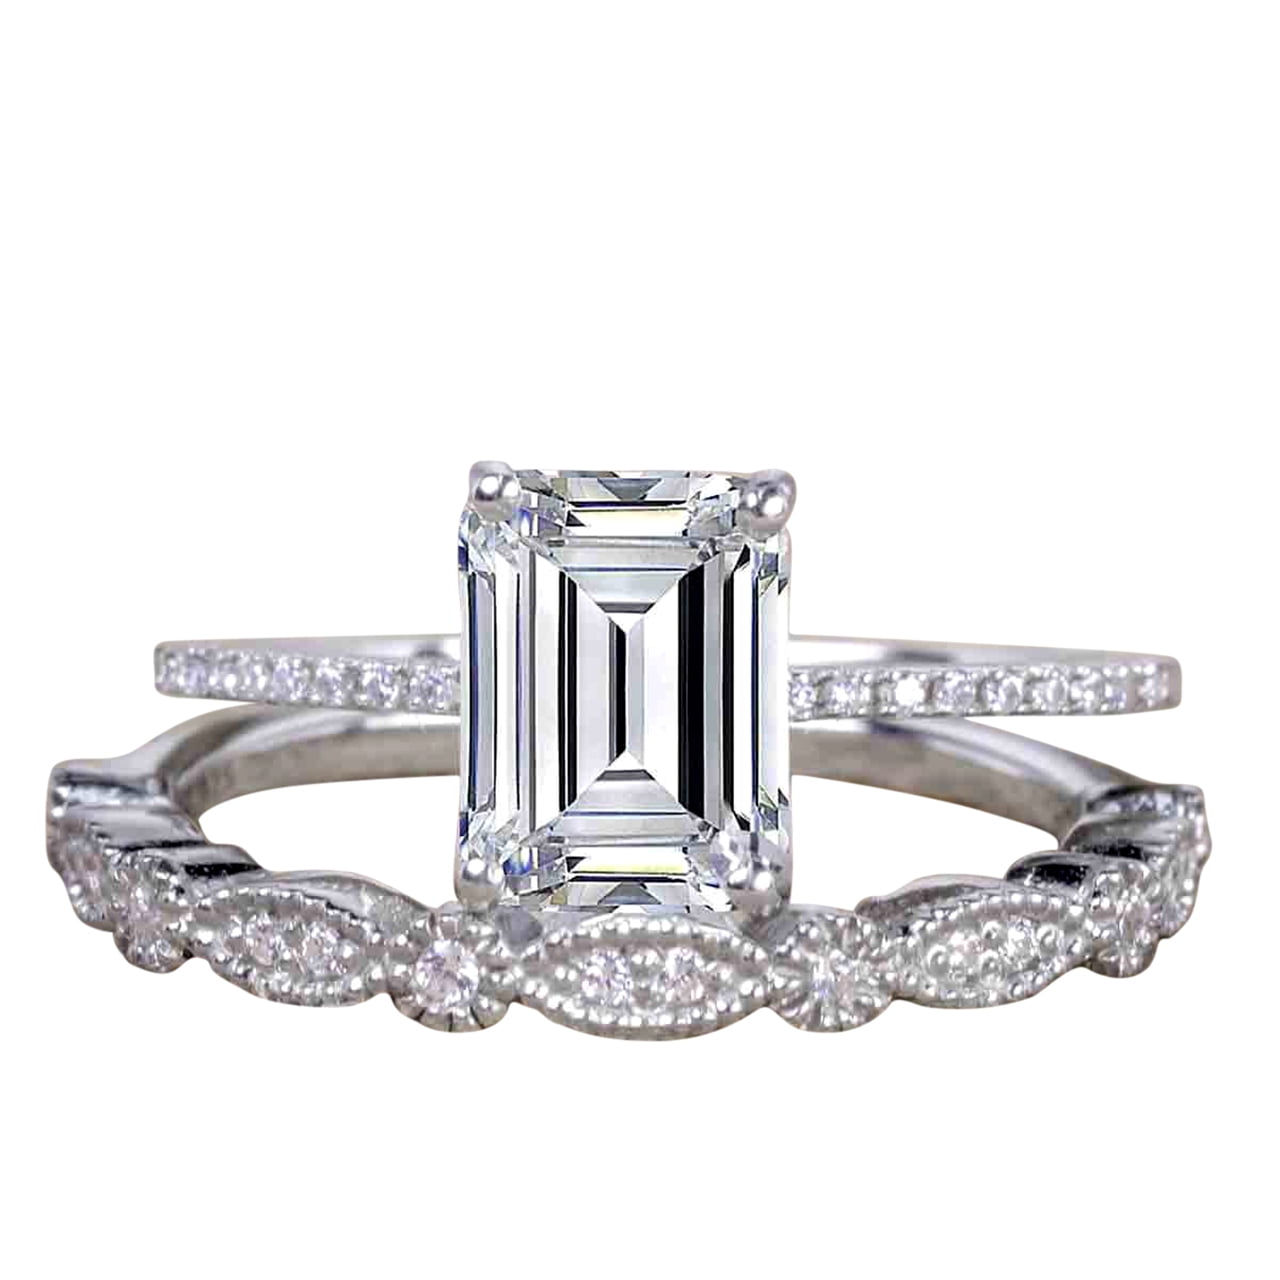 Details about   2.00Ct Emerald Cut White Diamond Solitaire Engagement Ring in 14K White Gold 